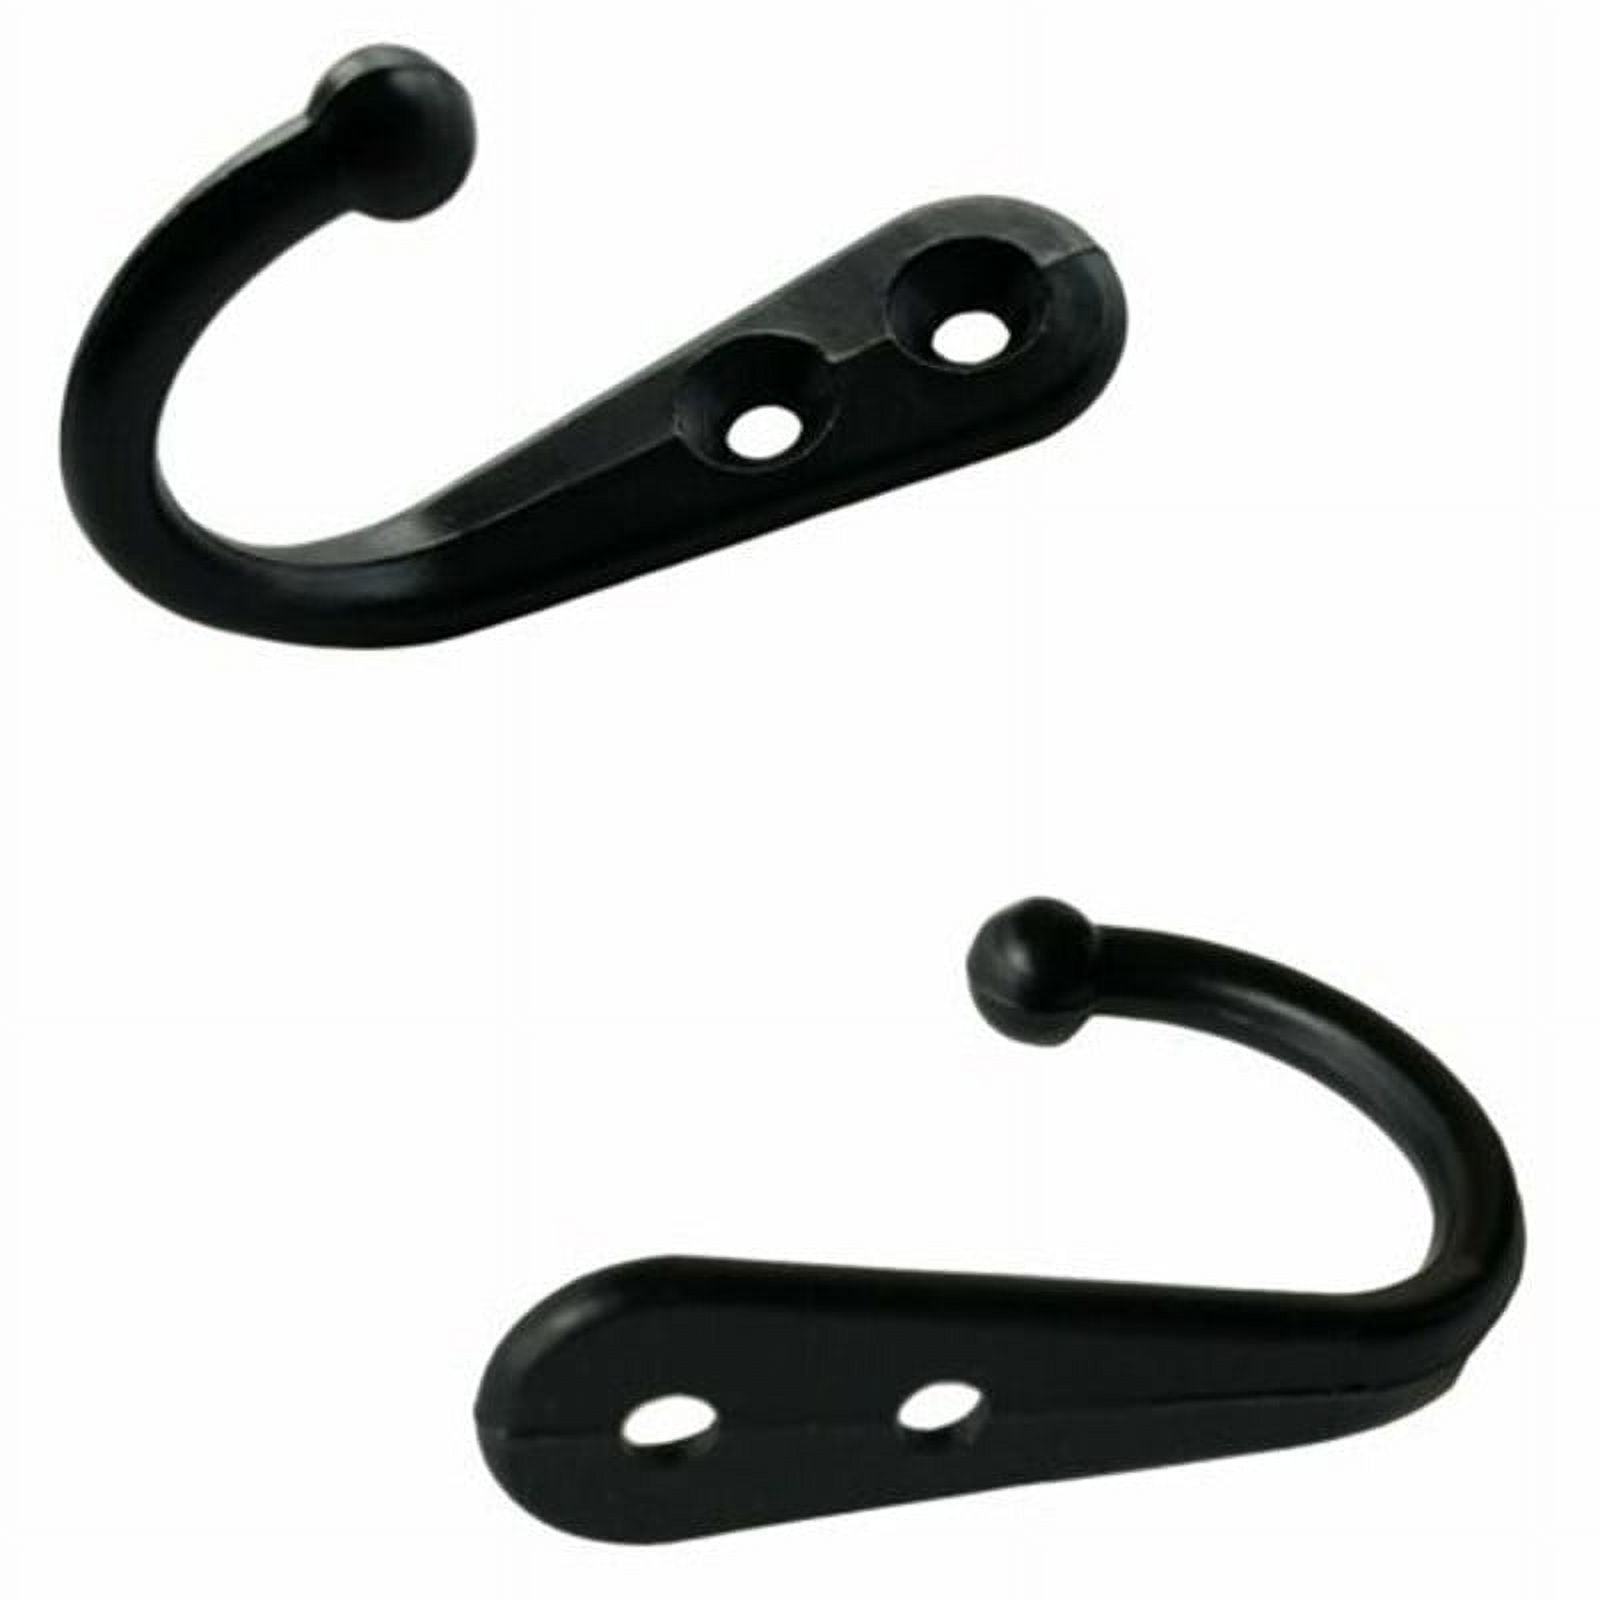 Ruibeauty 10Pcs Black Small Coat Hooks with 20 Screws for Hanging